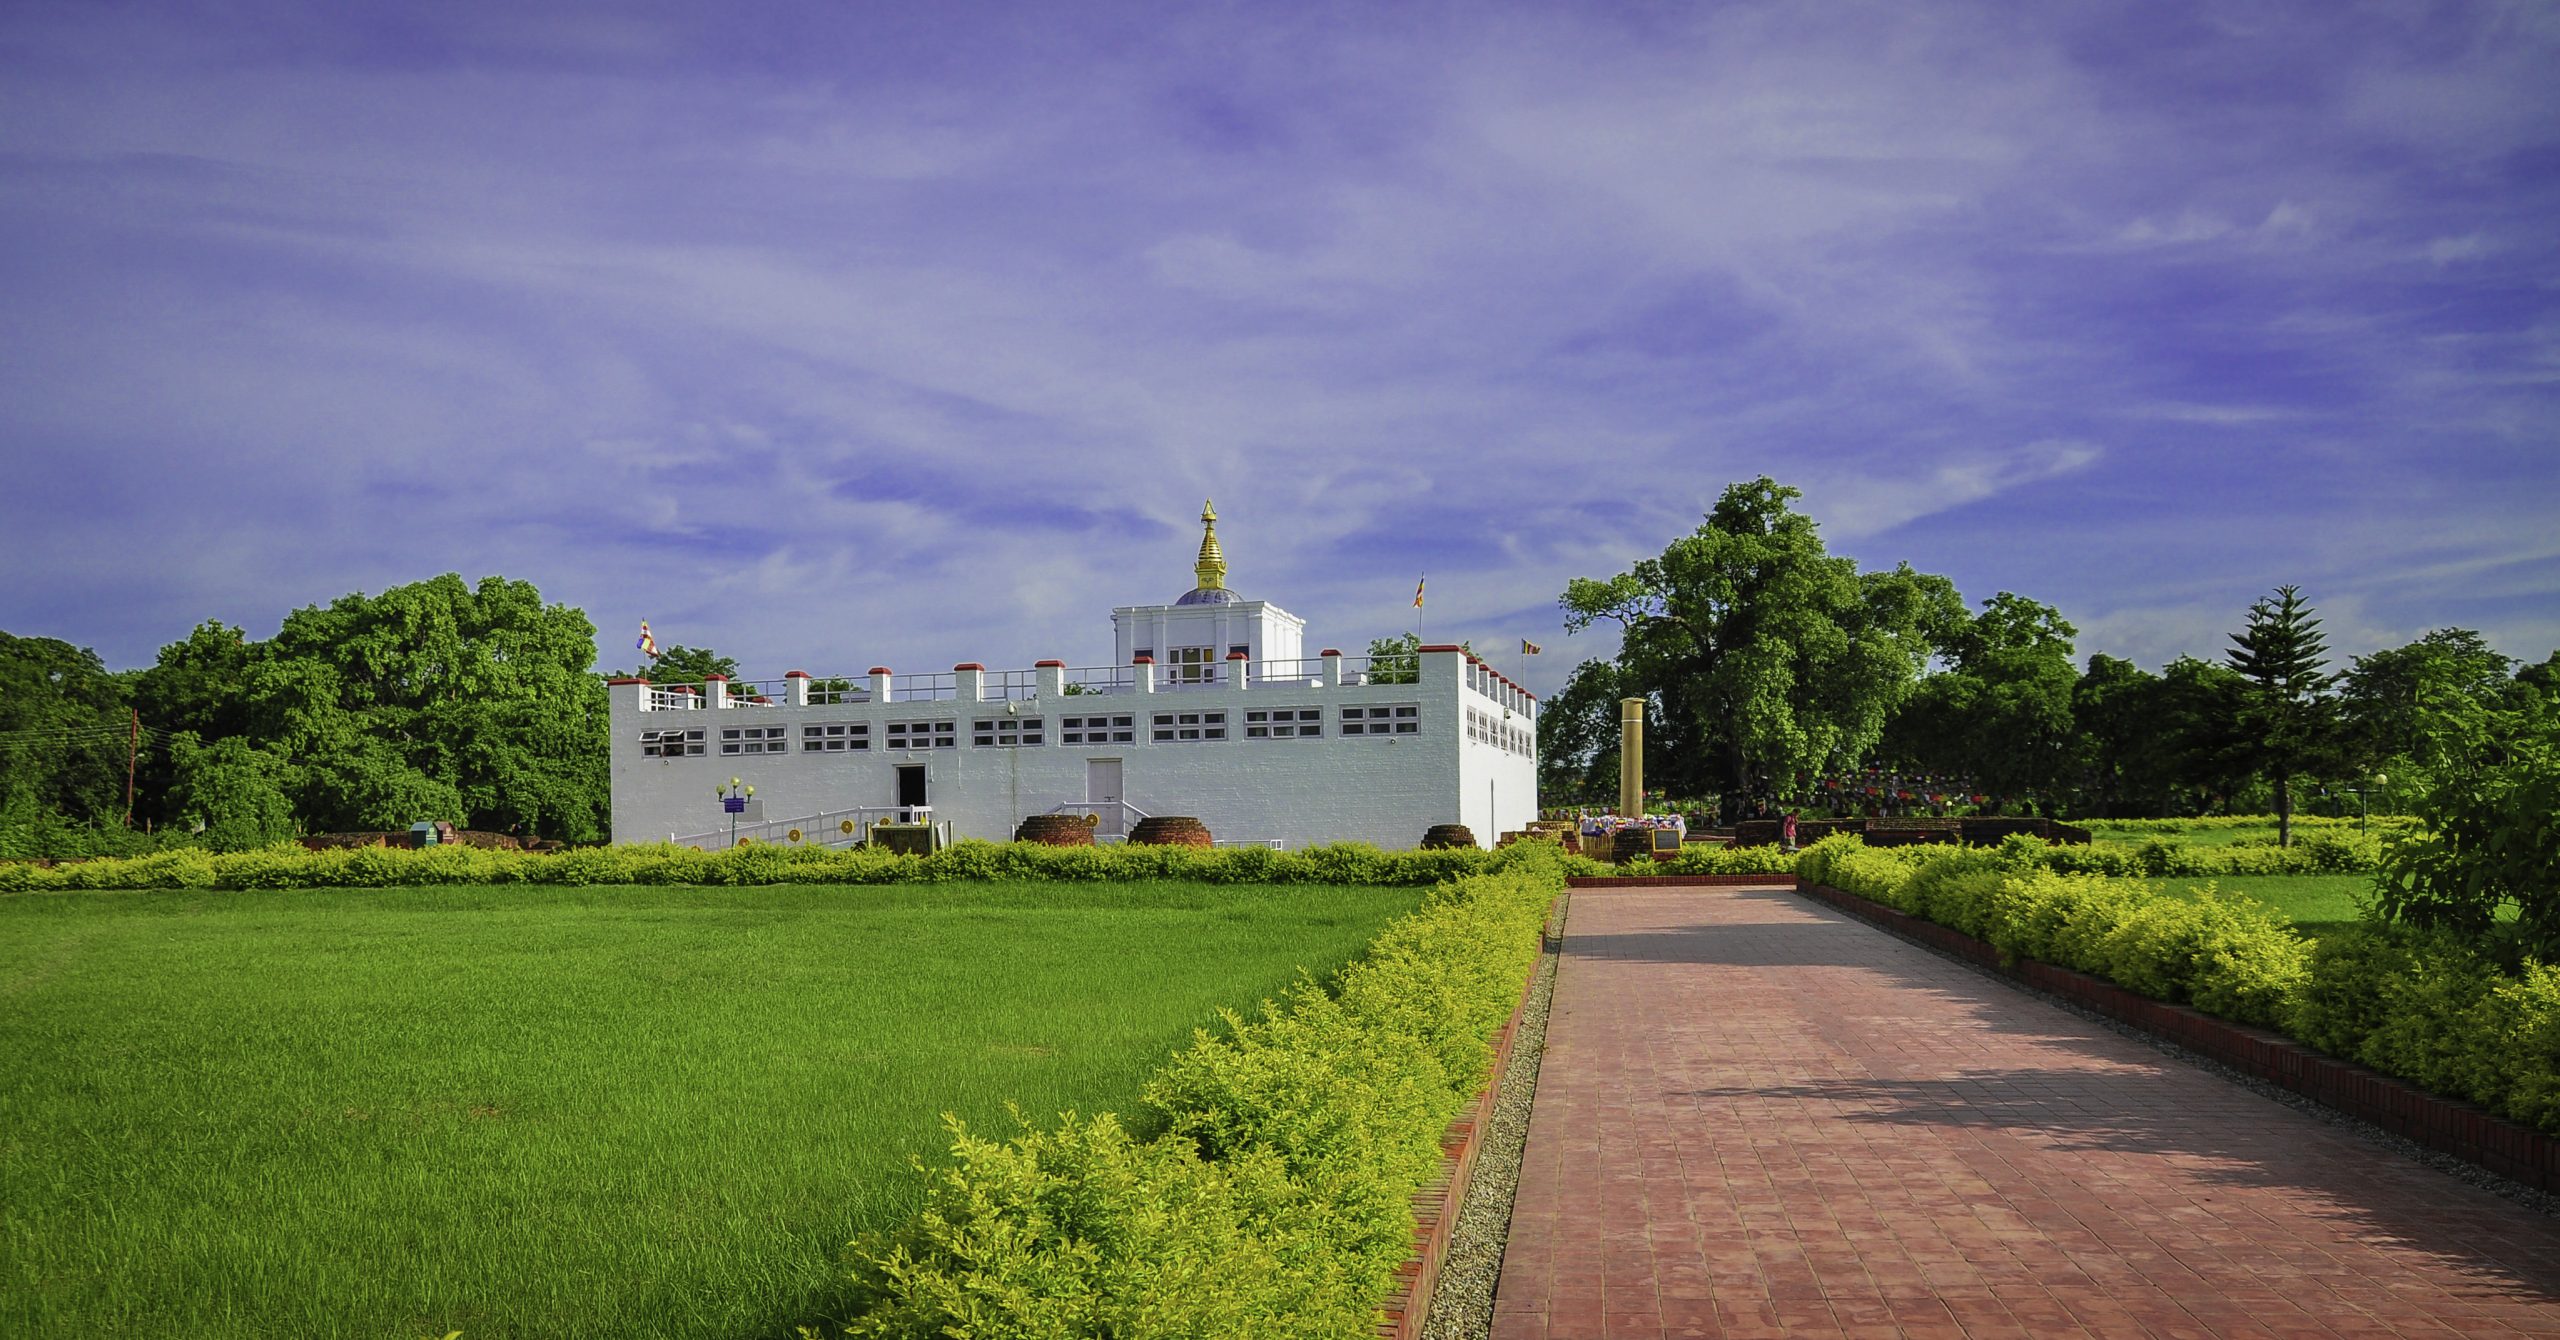 Number of domestic tourists to Lumbini growing in wake of lift of lockdown